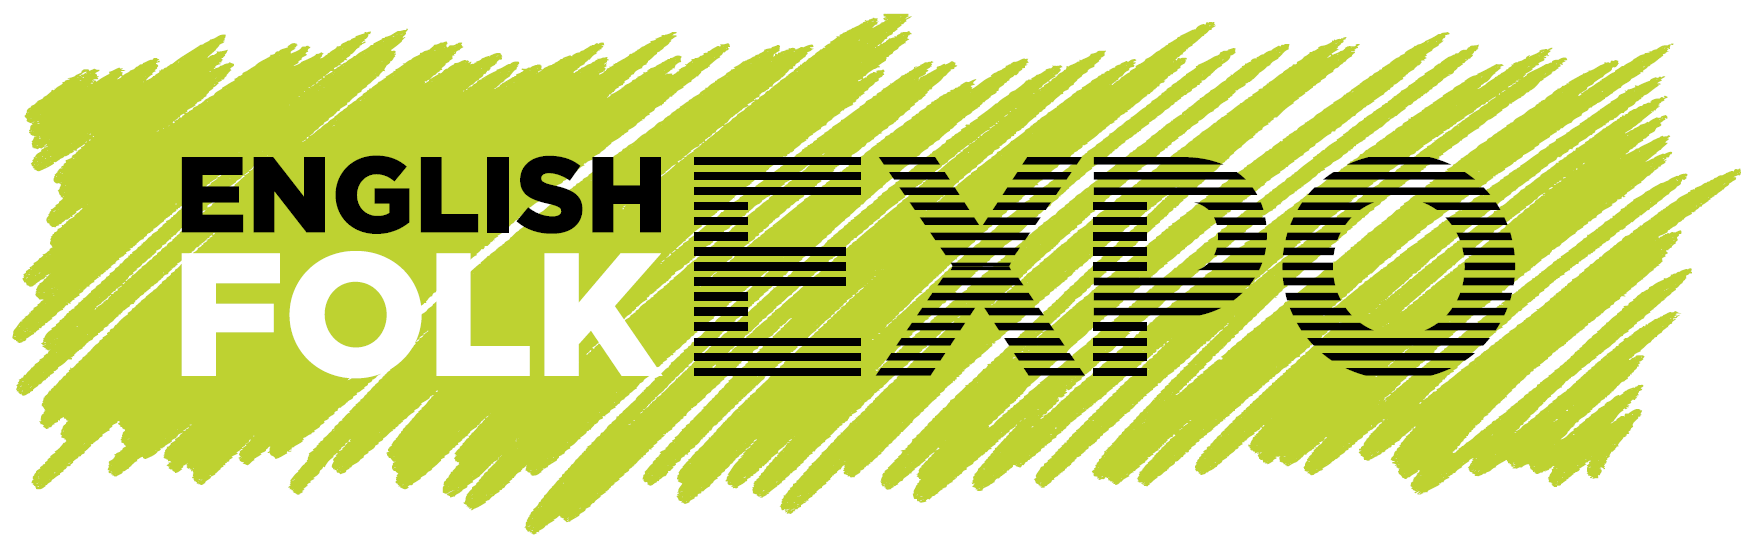 English Folk Expo: The Open Fund for Organisations